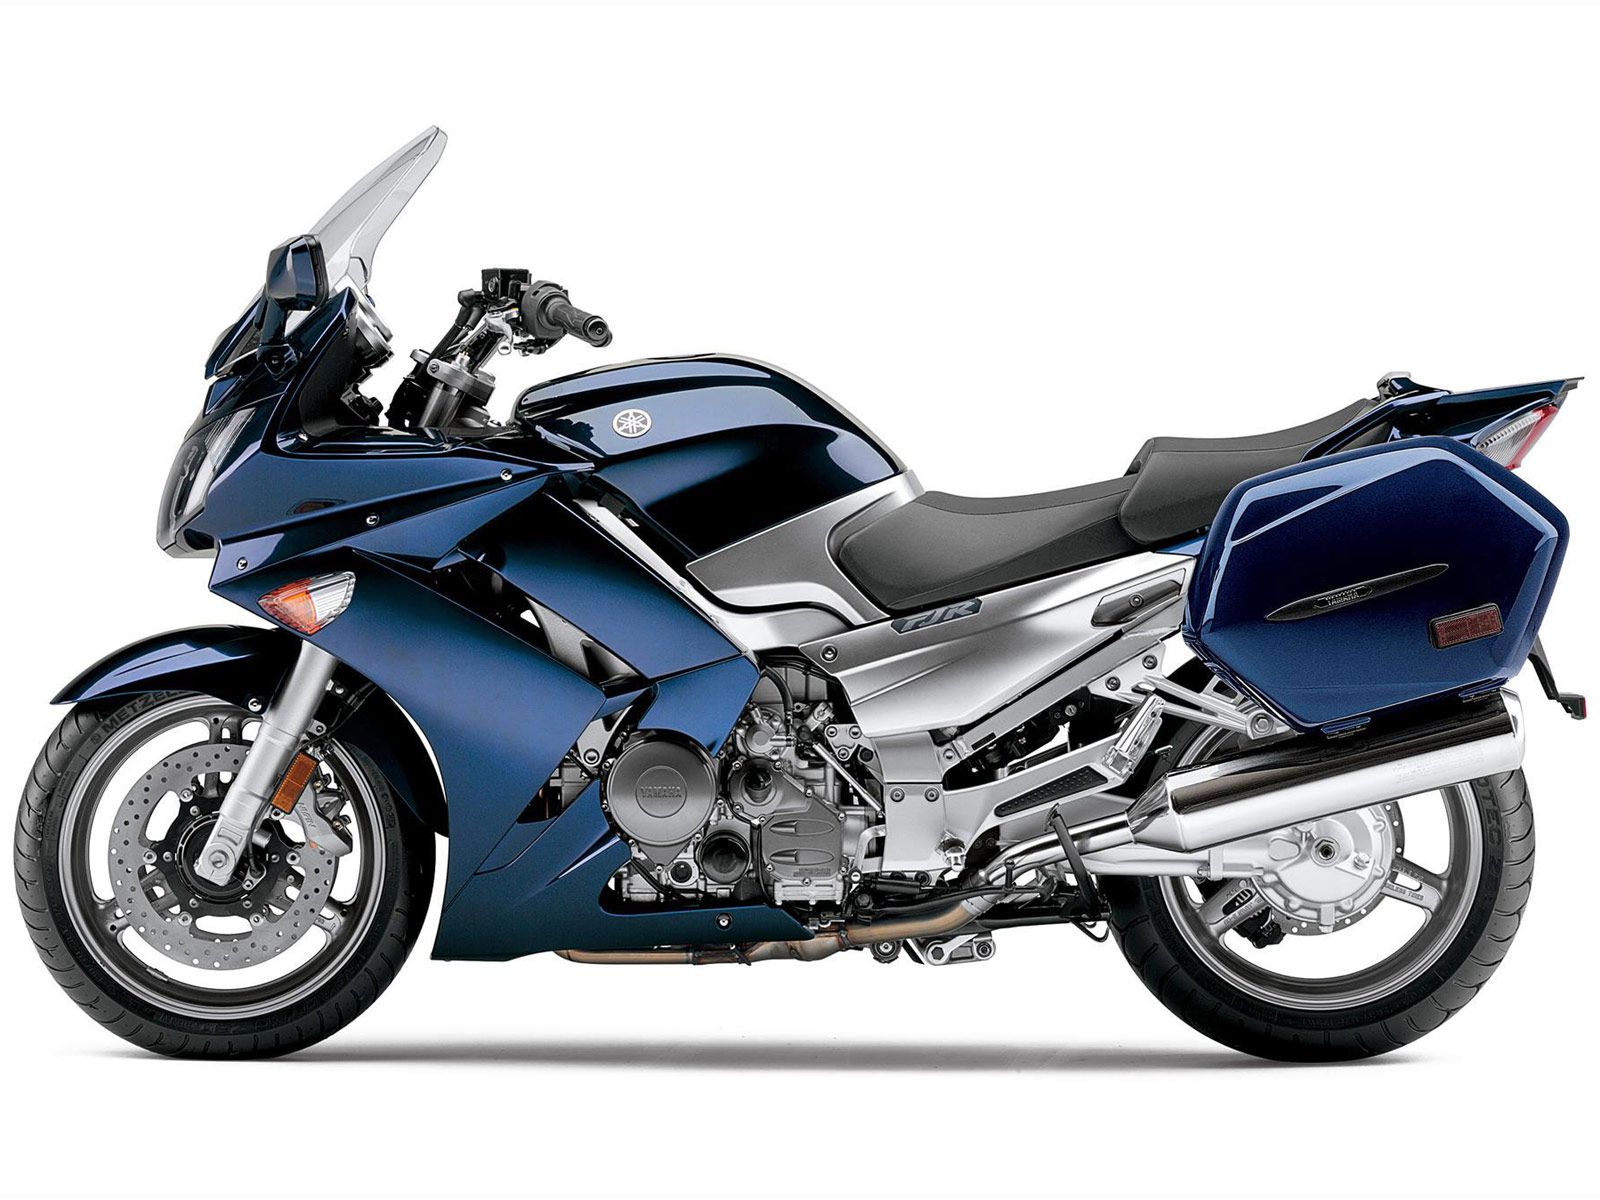 Yamaha FJR1300A Specs Image and Pricing